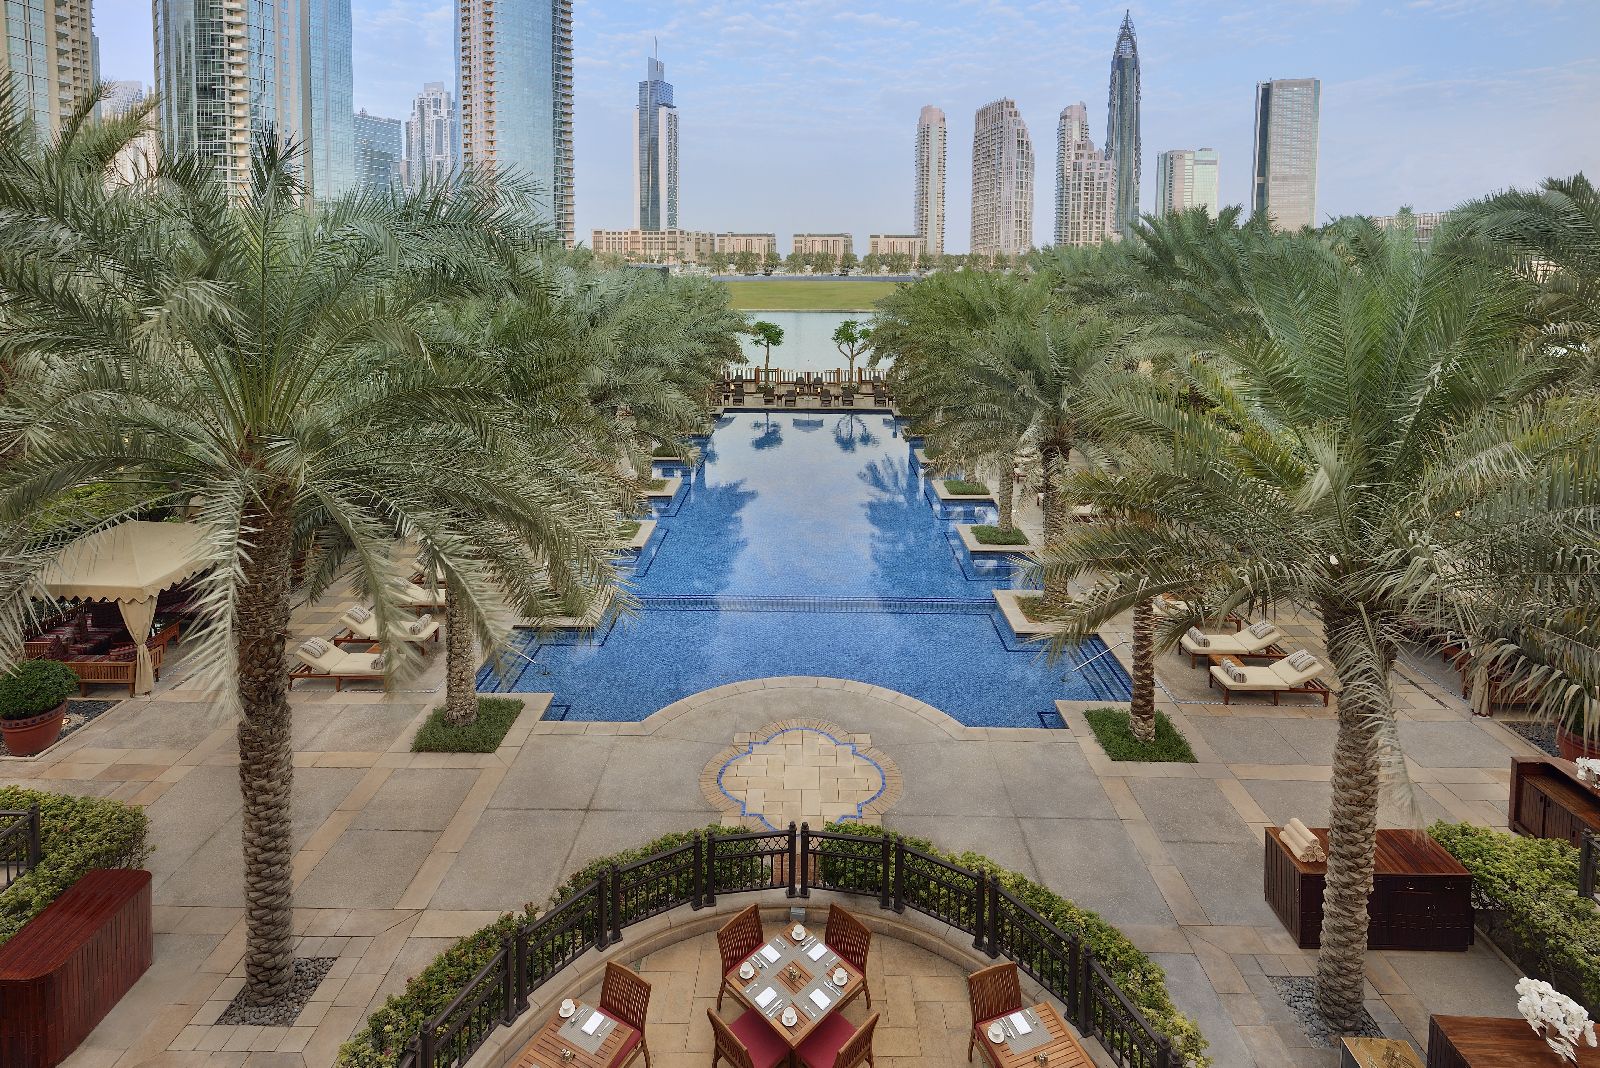 The swimming pool at The Palace Downtown Dubai